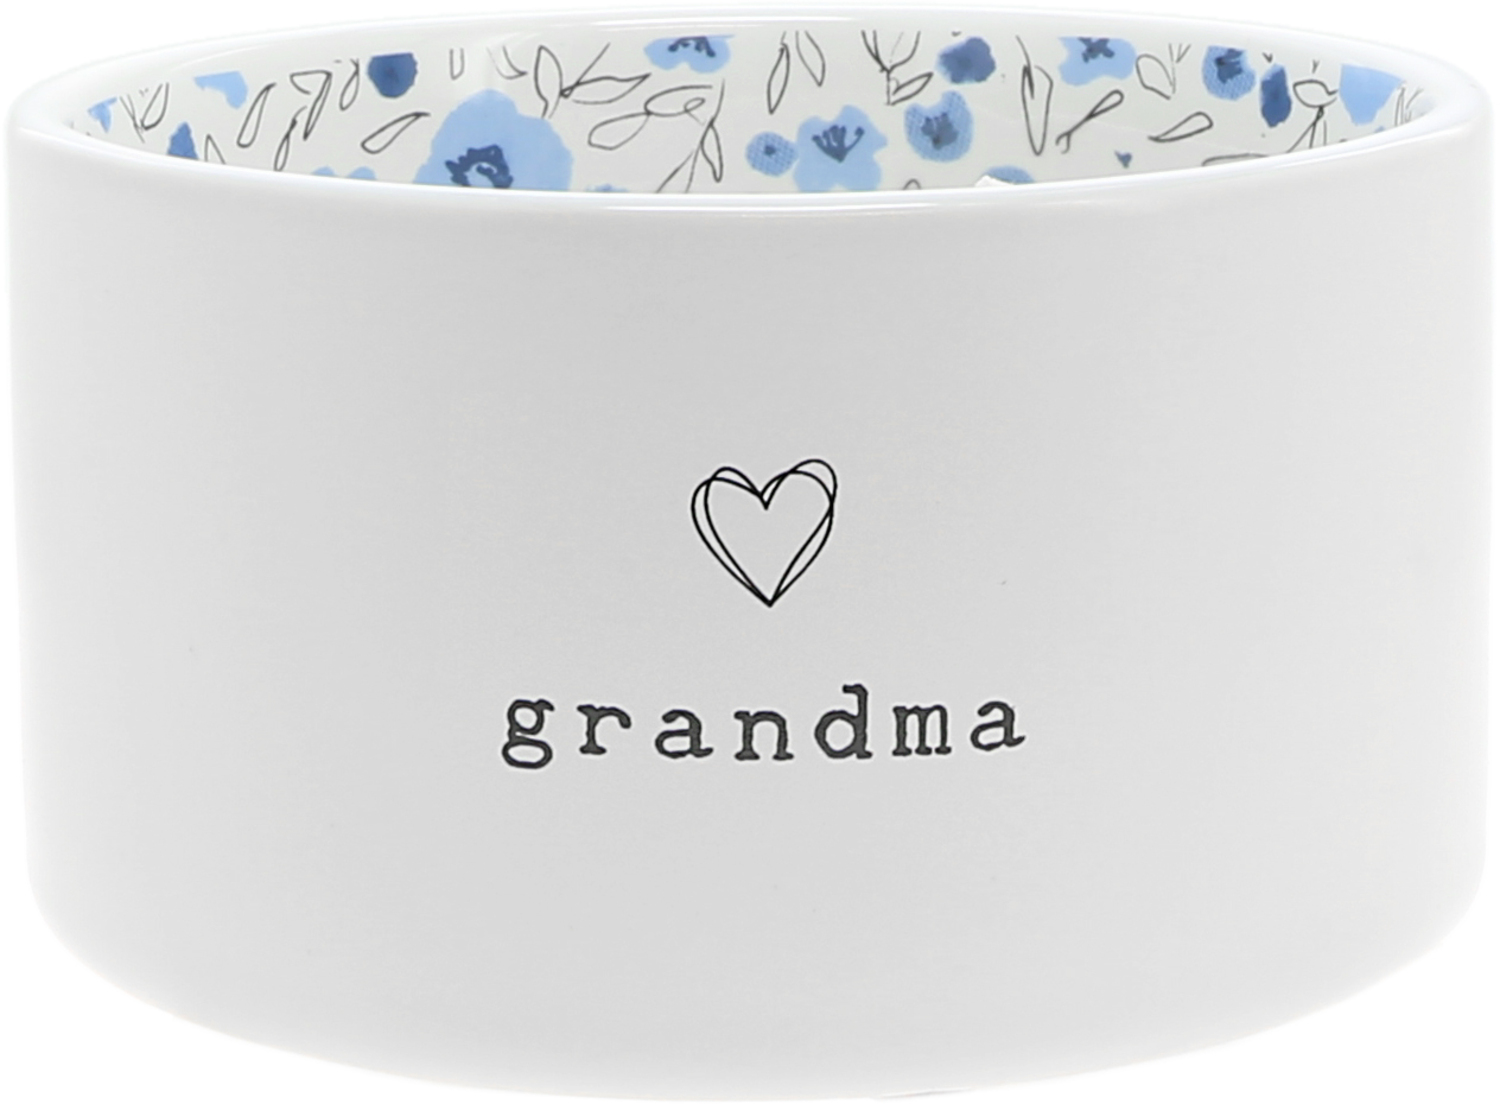 Grandma by You Make Me Smile -ALW - Grandma - 10 oz 100% Soy Wax Reveal, Triple Wick Candle Scent: Tranquility